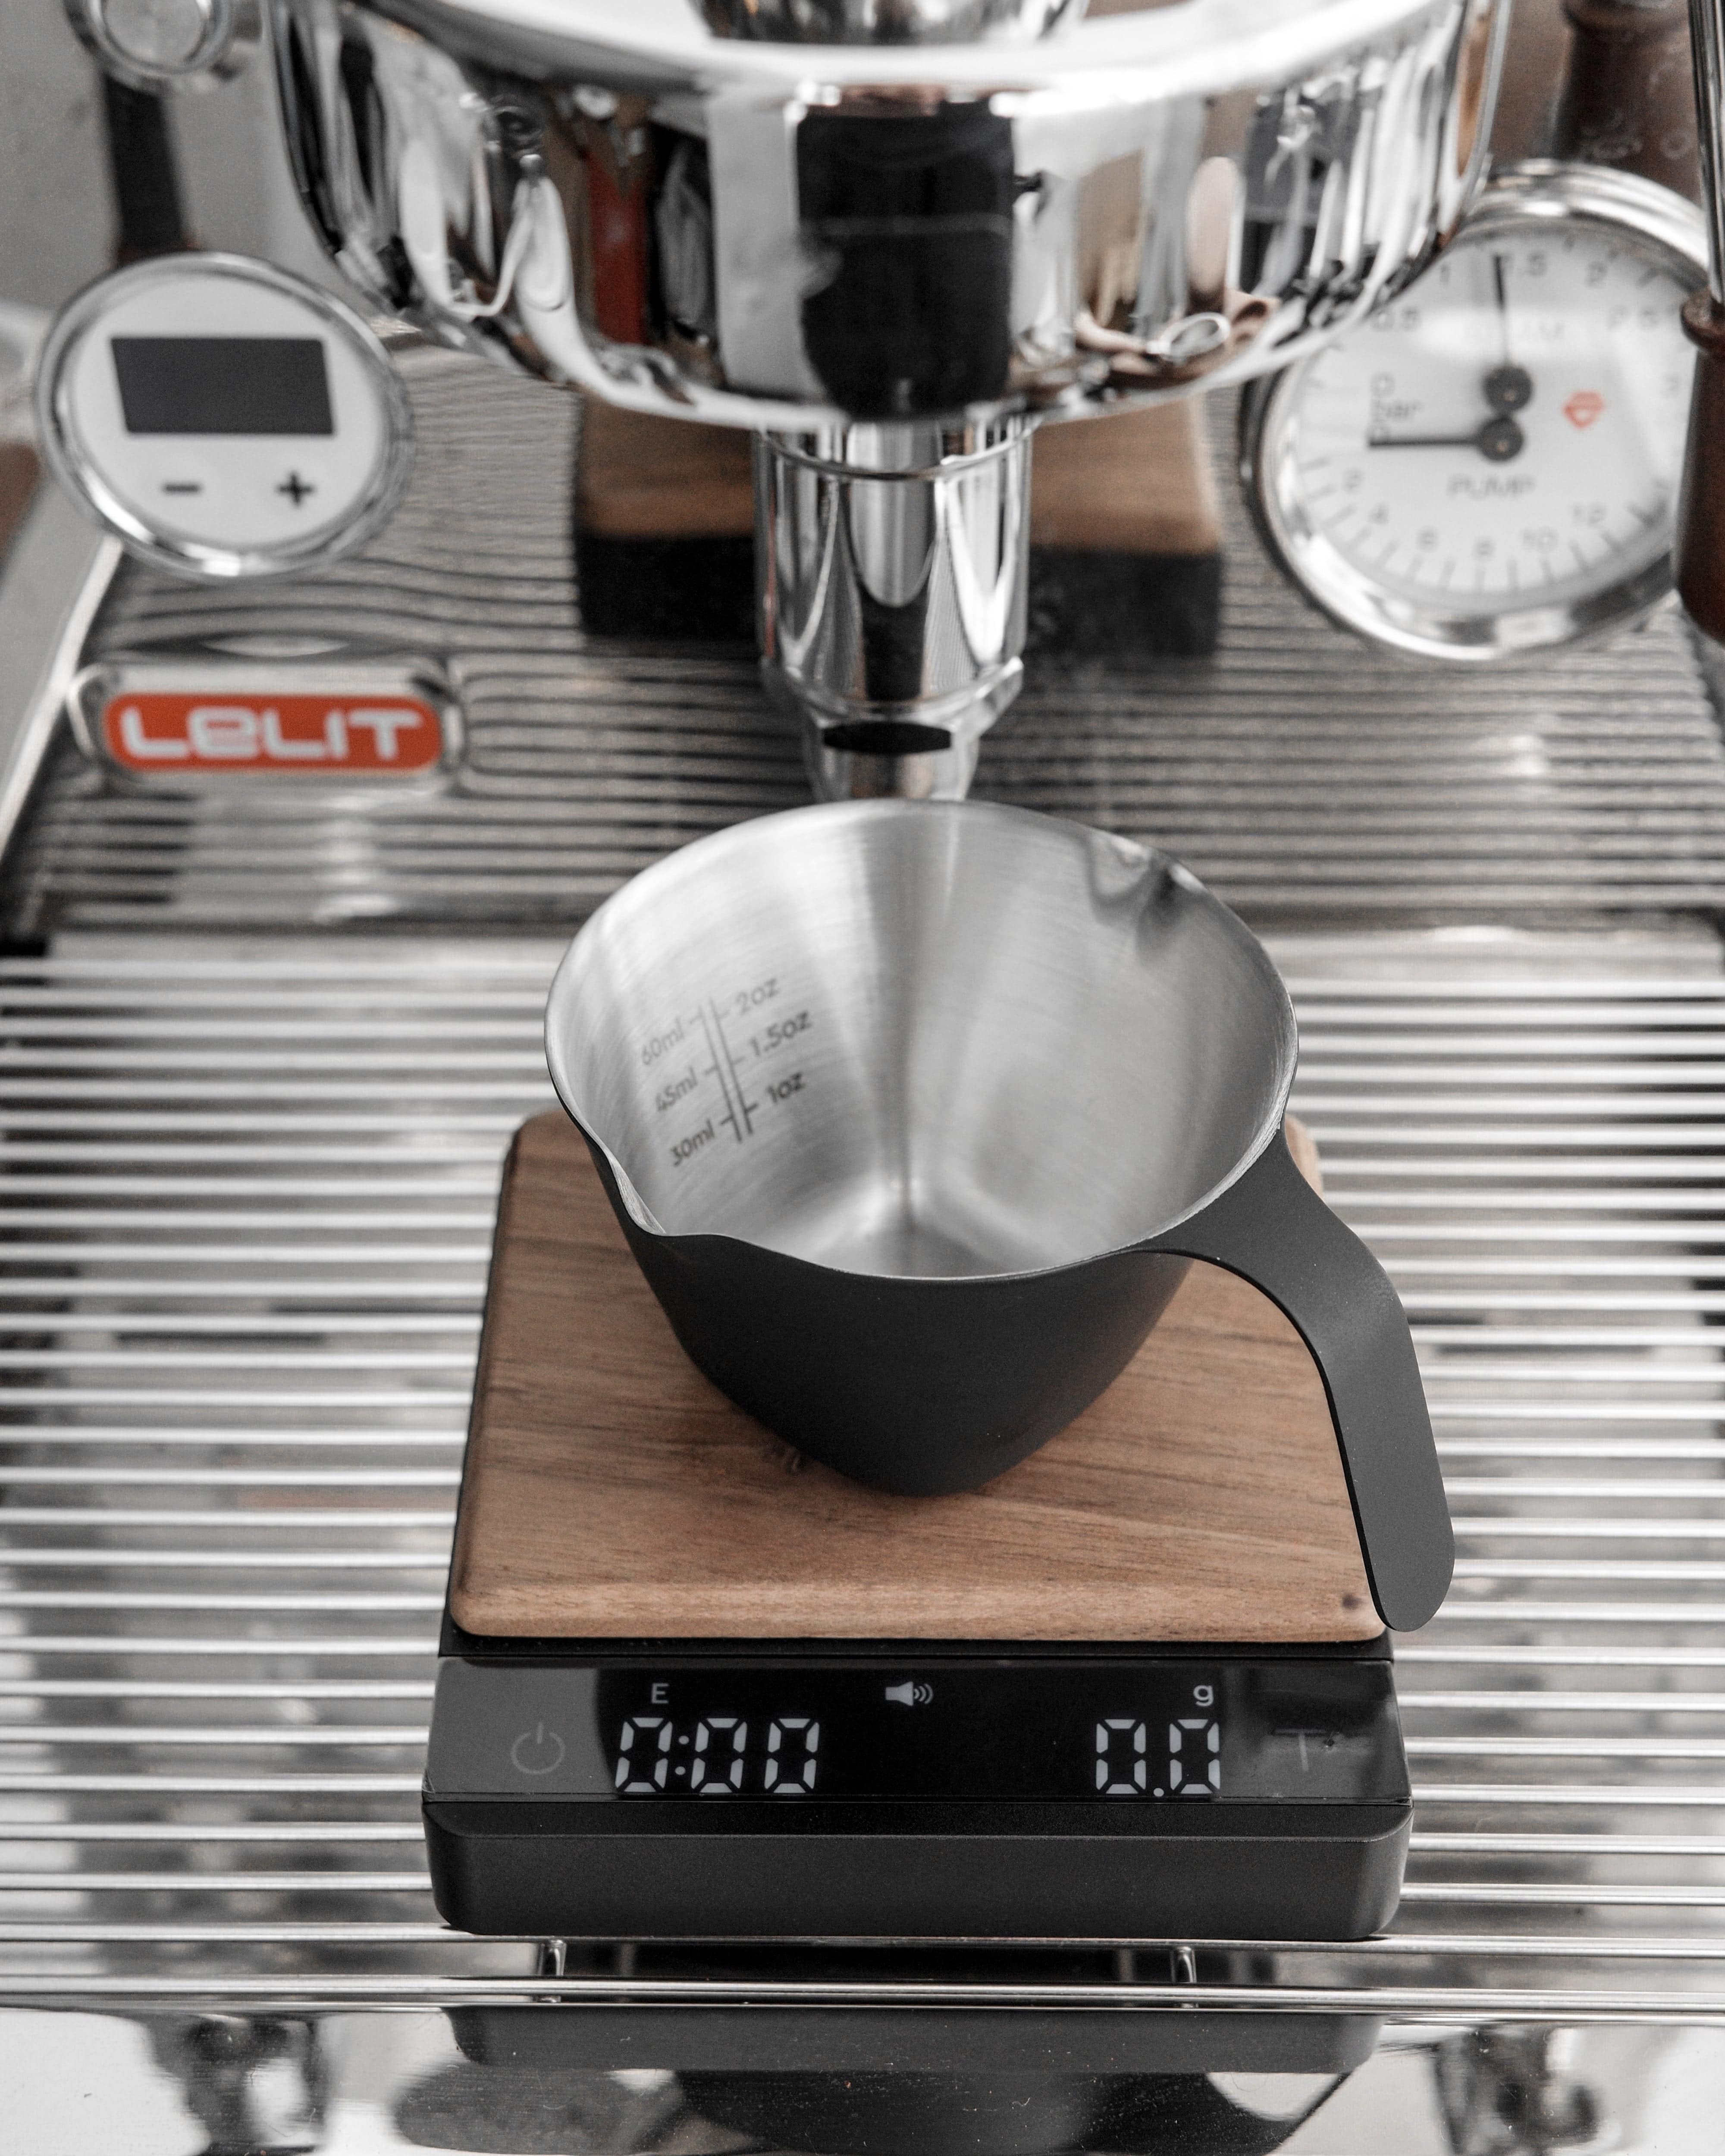 Normcore / Pocket Coffee Scale